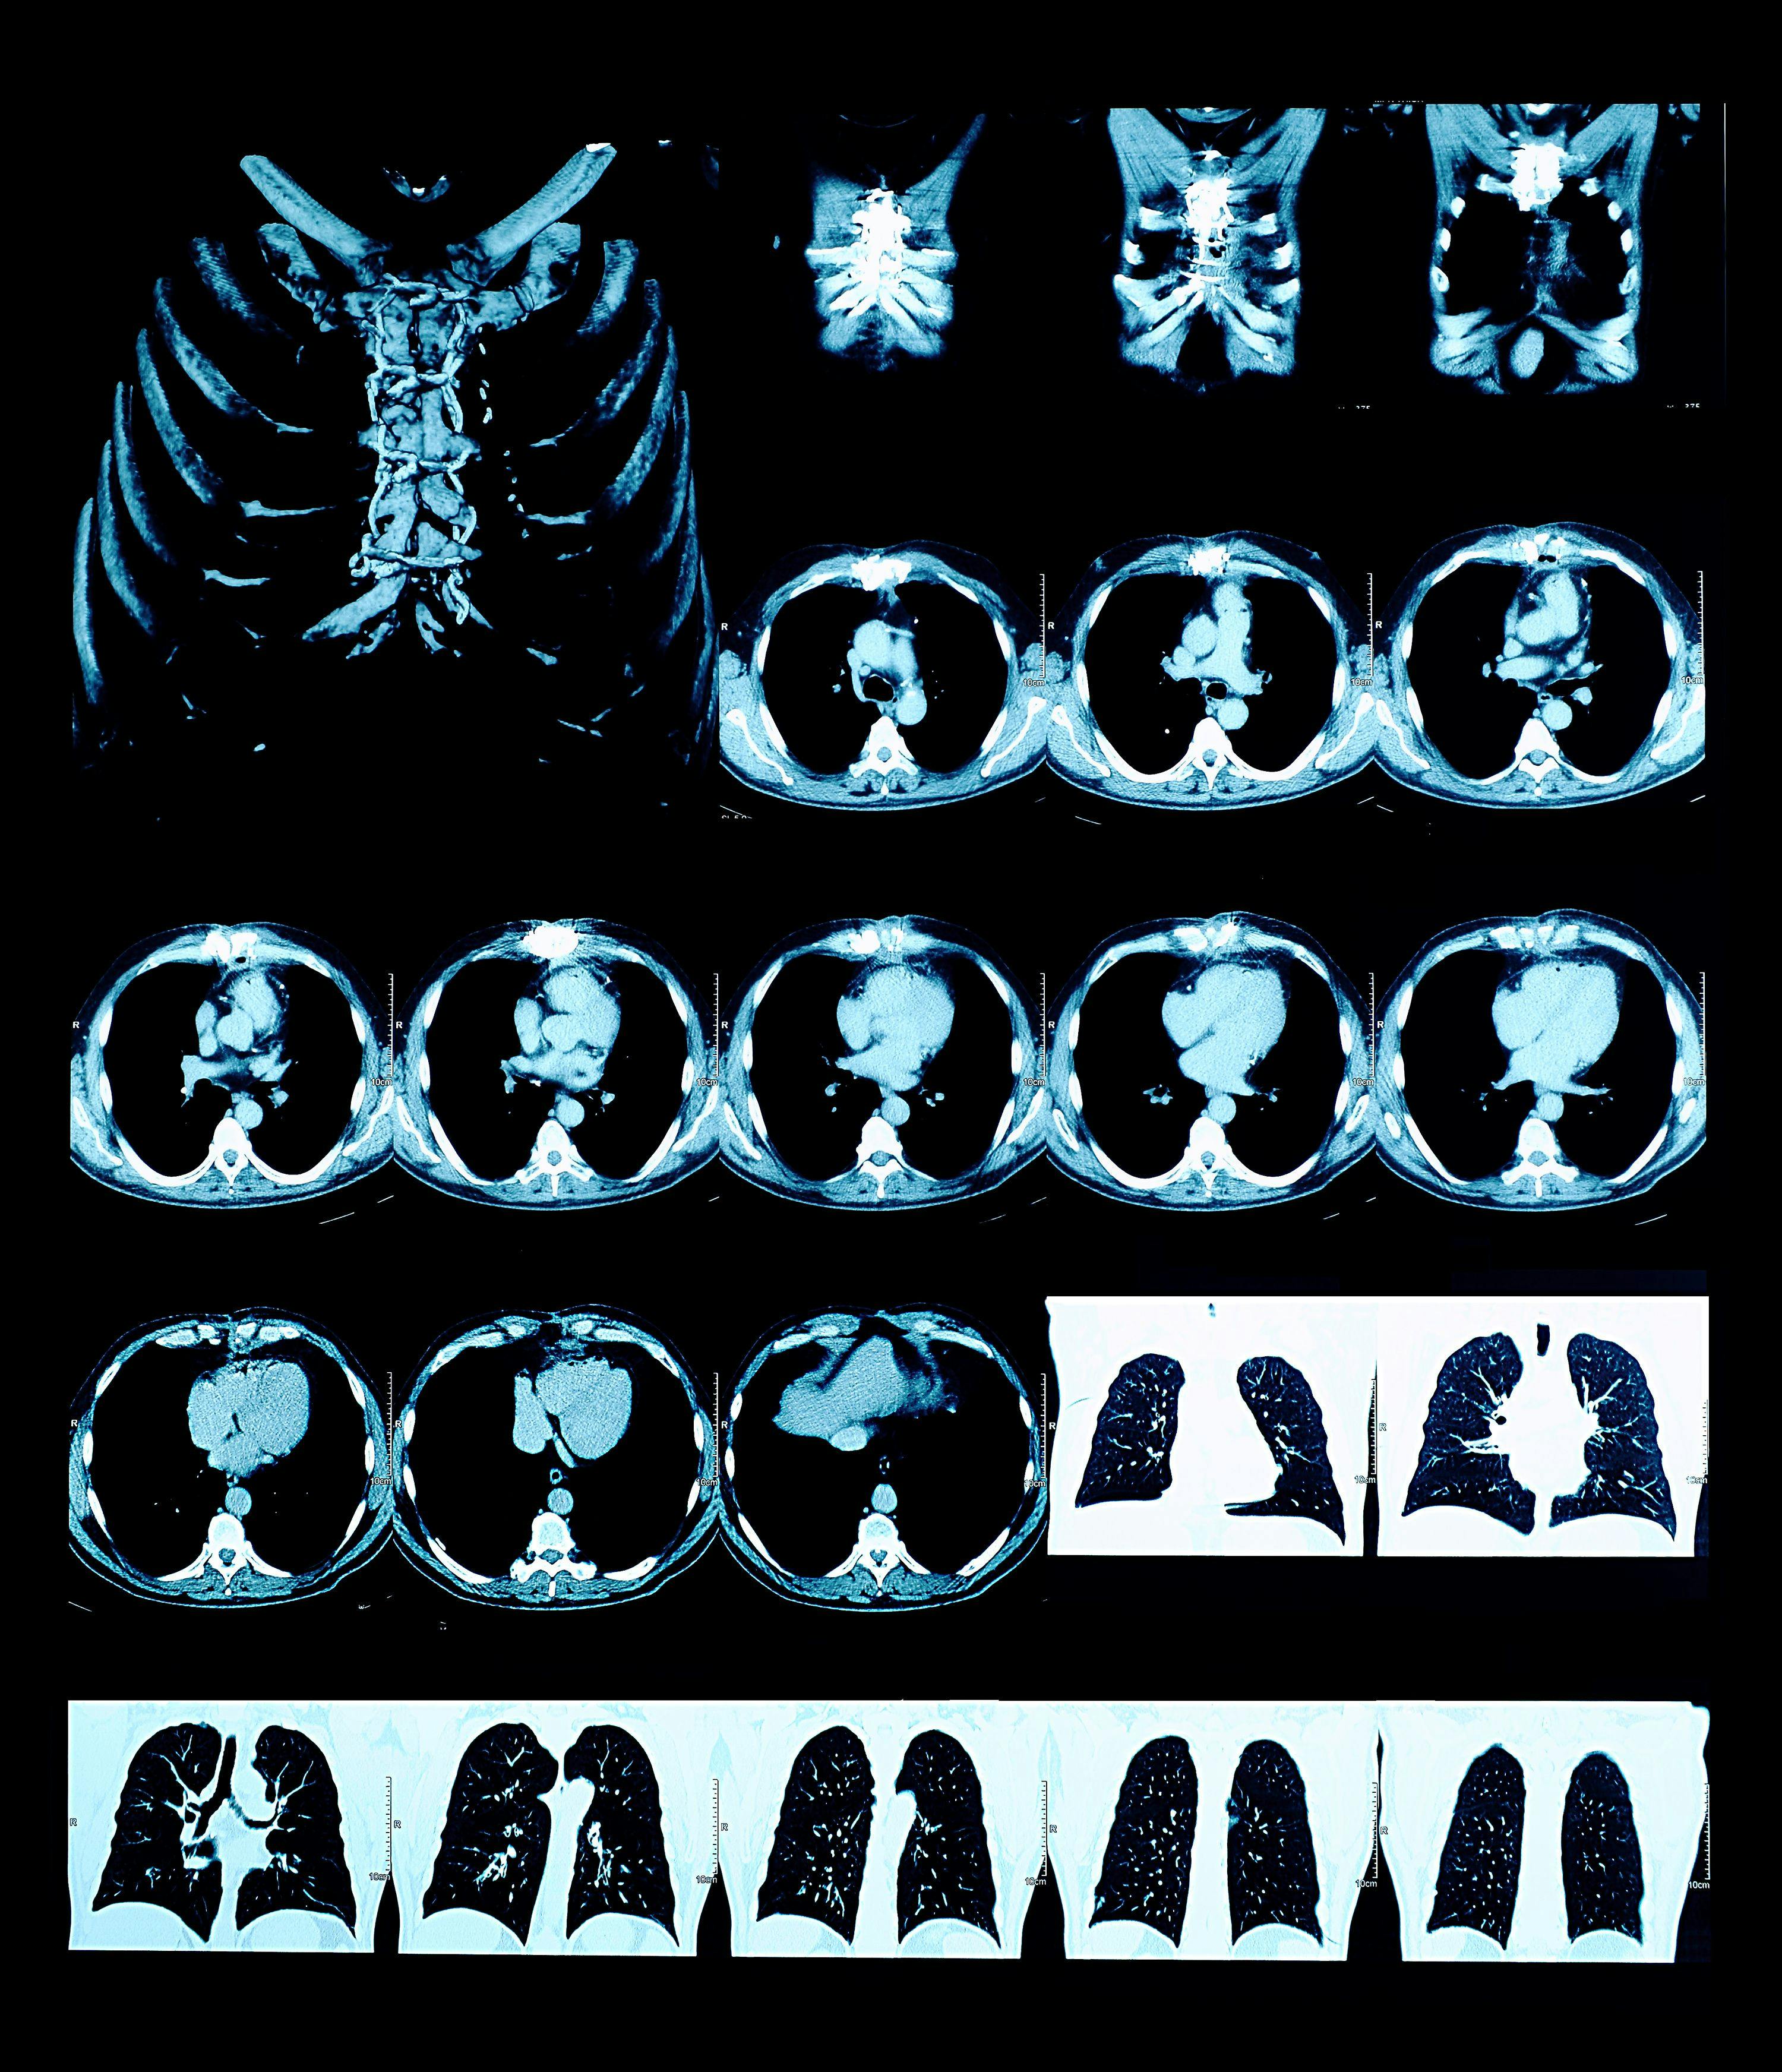 CT scans of the lungs